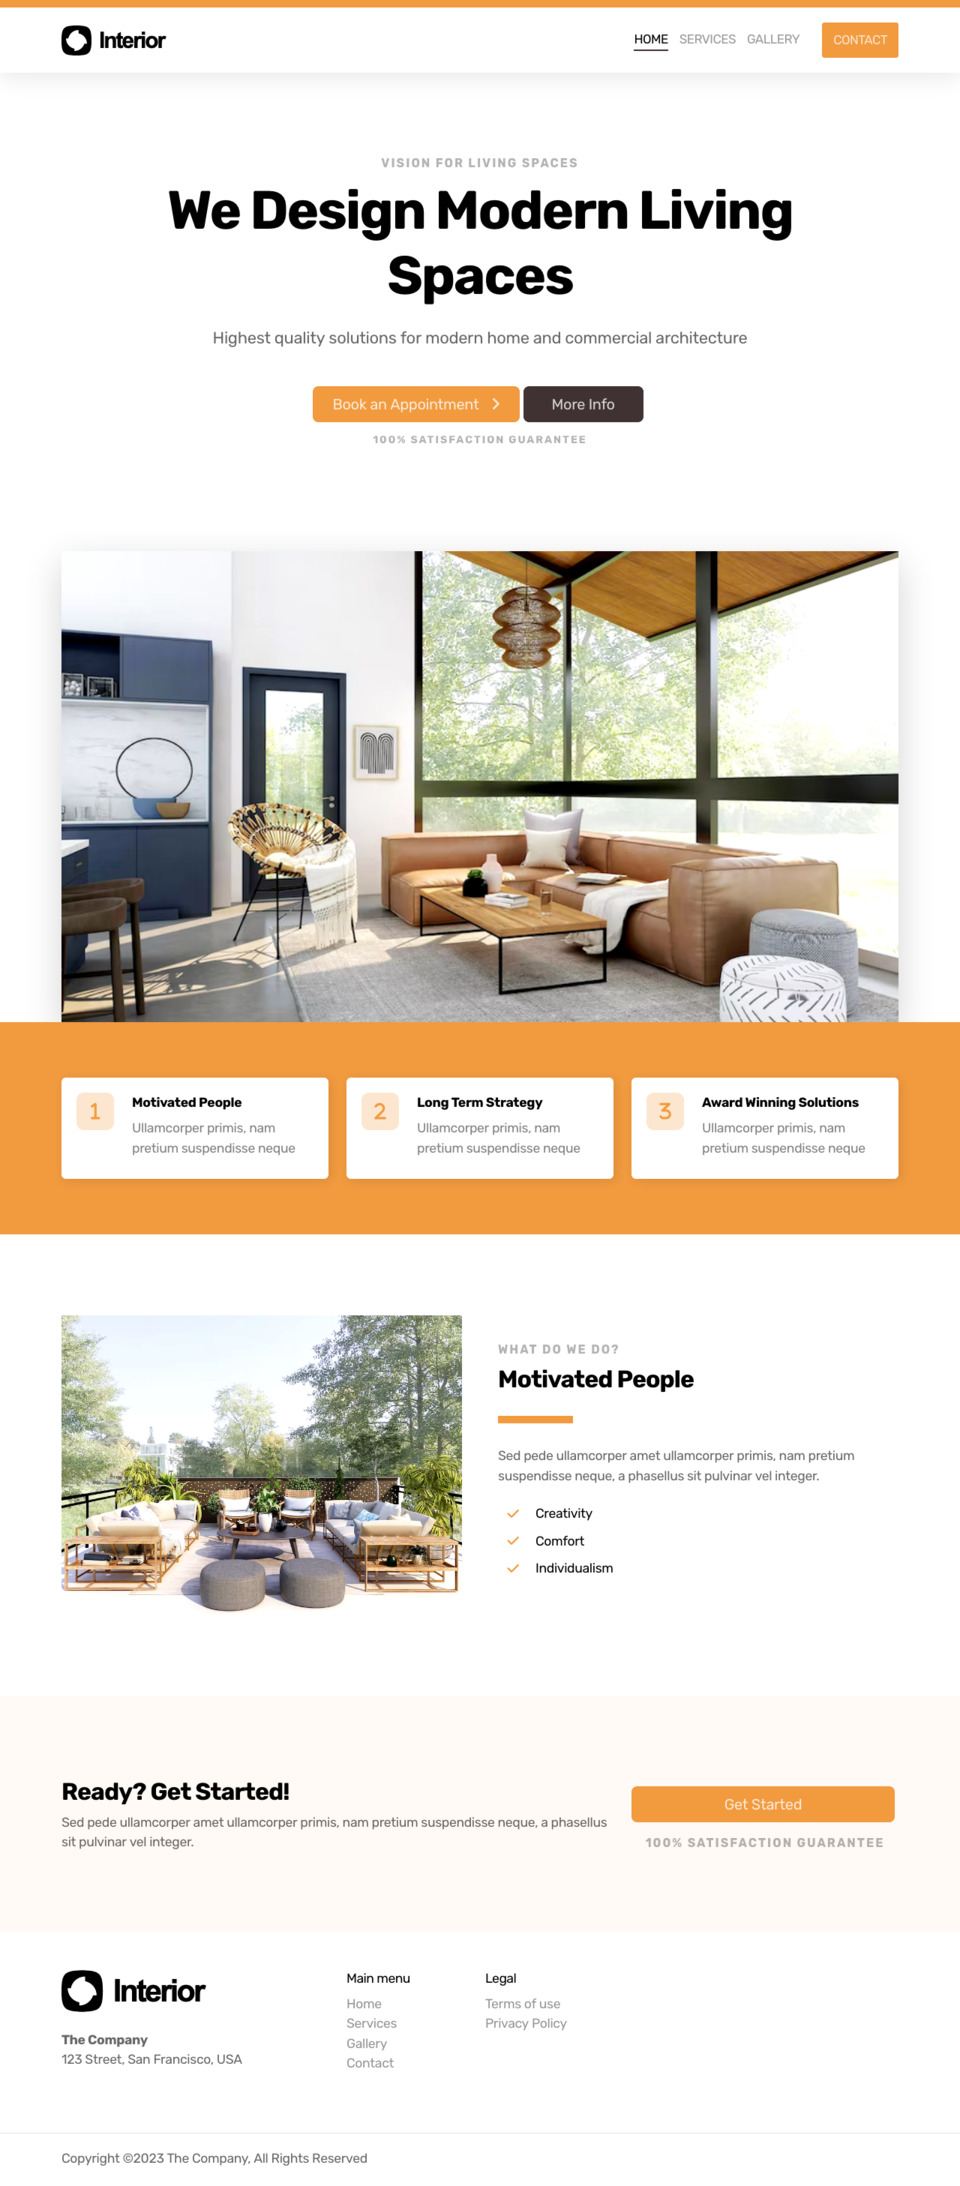 Interior Design Website Template - Ideal for interior designers, architects, home decor enthusiasts, furniture designers, or anyone looking to create a visually stunning website.